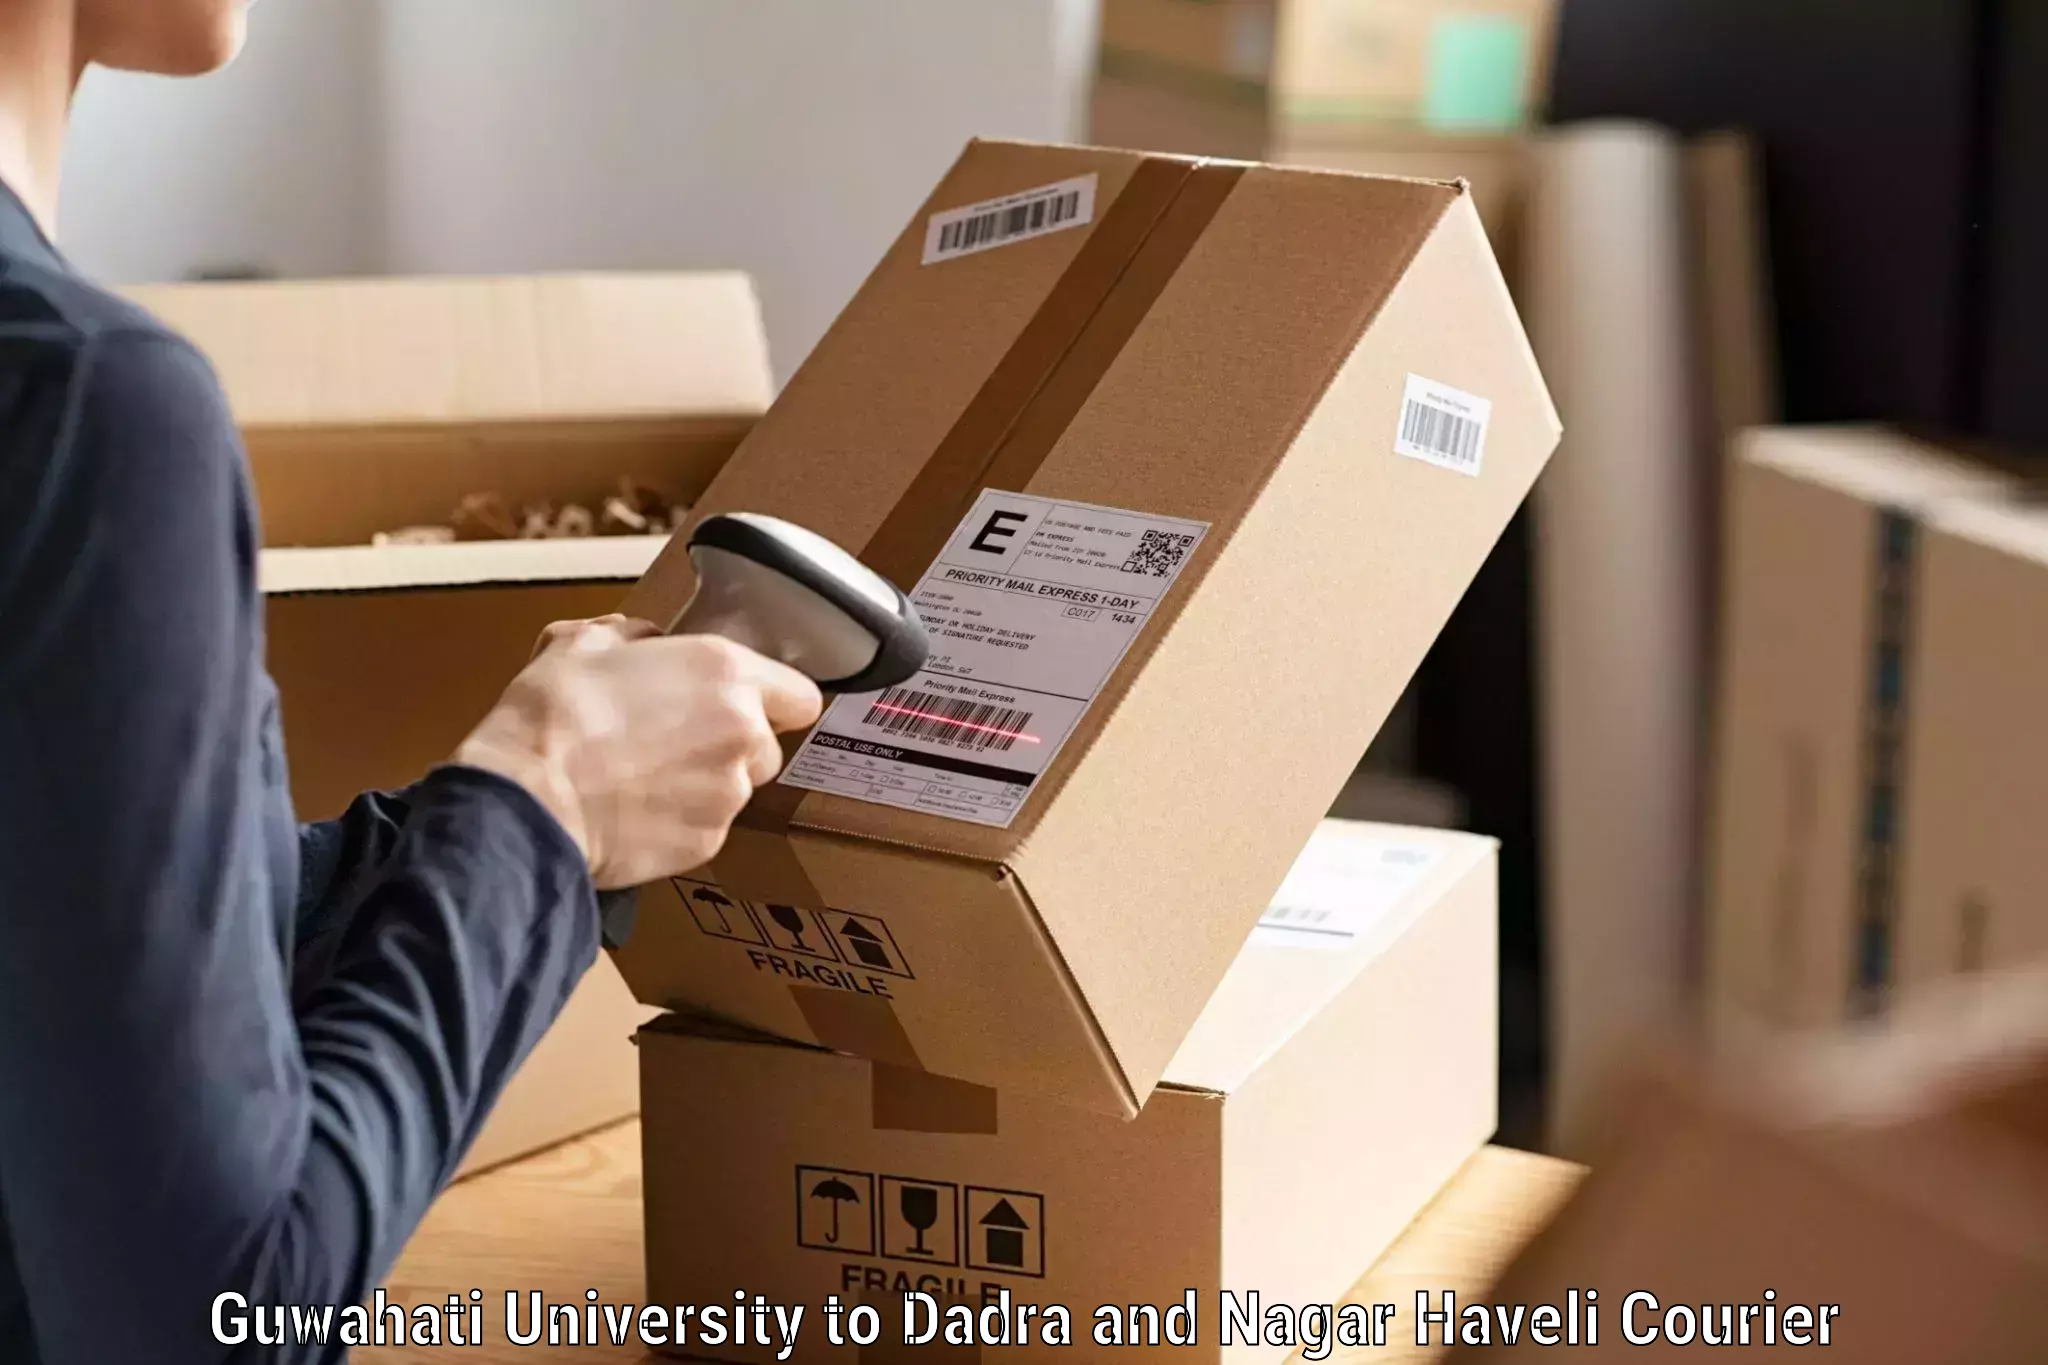 Express package delivery Guwahati University to Dadra and Nagar Haveli